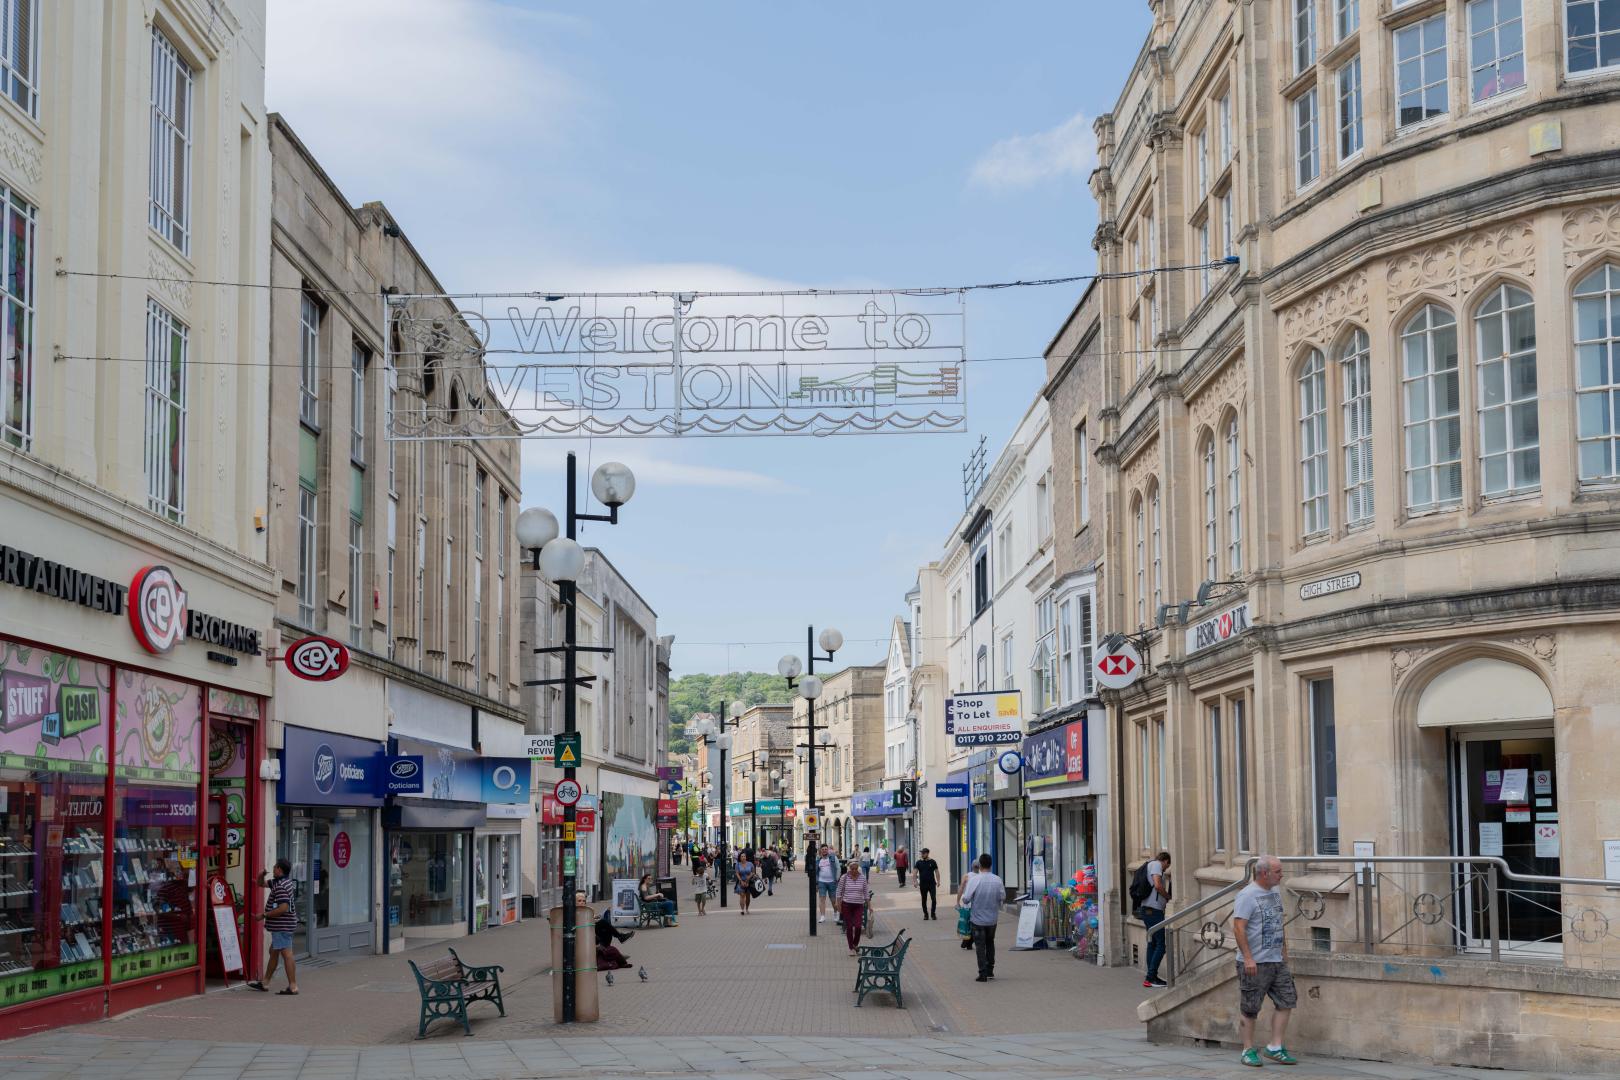 Picture of Weston's high street by Paul Blakemore